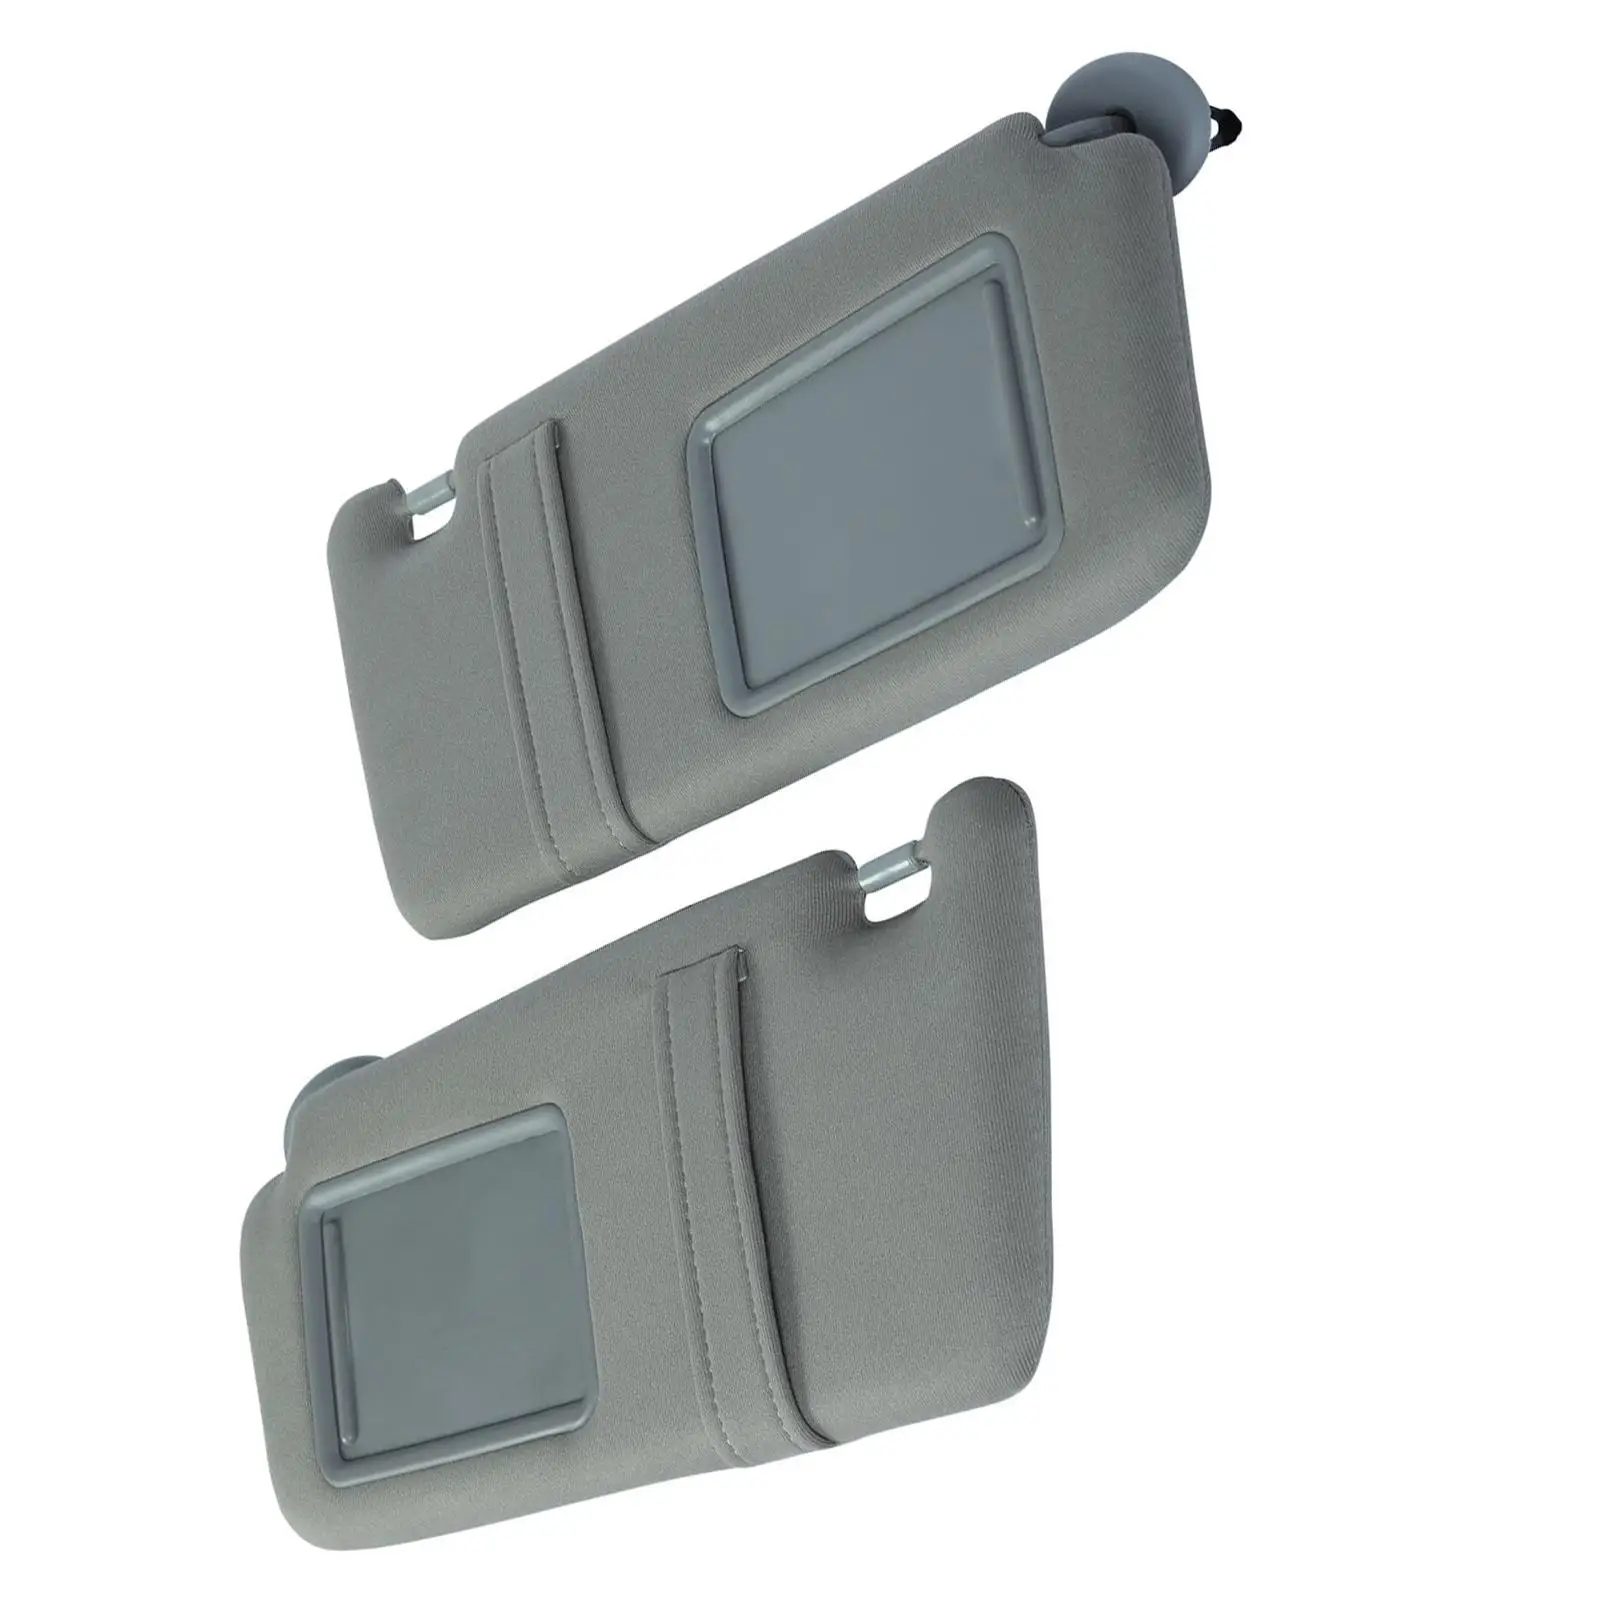 2 Pieces Sun Visor 74320-06780-b0 Left and Right Side Gray Replaces Parts for Toyota for camry 2007 2008 2009 2010 2011